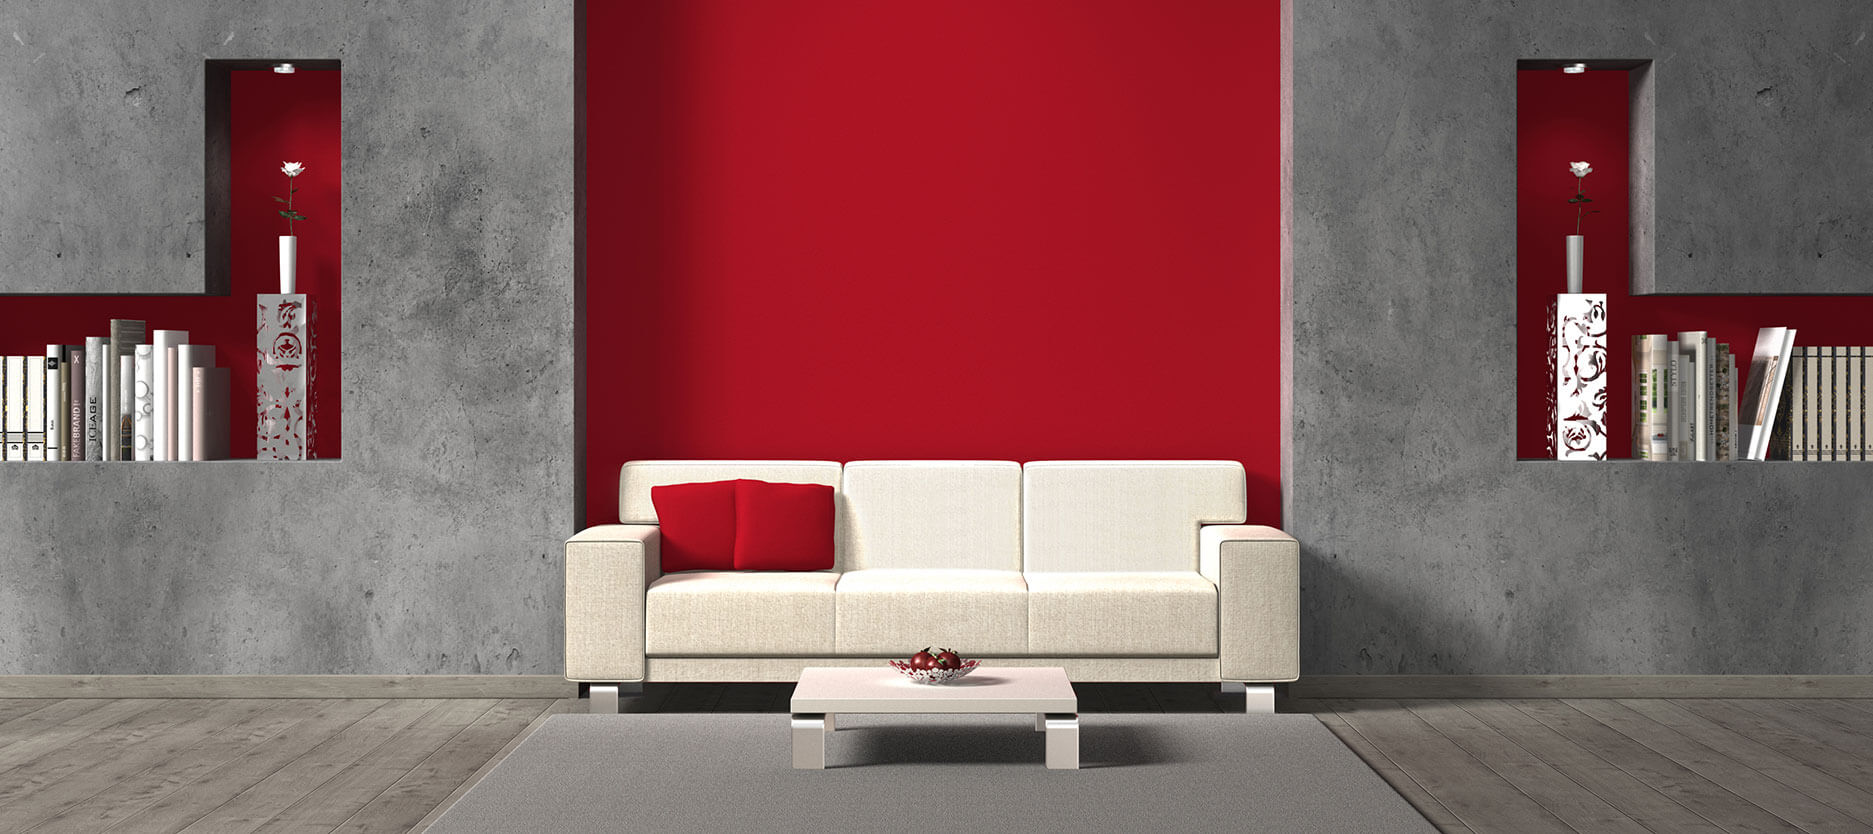 Whimsical red and gray living room